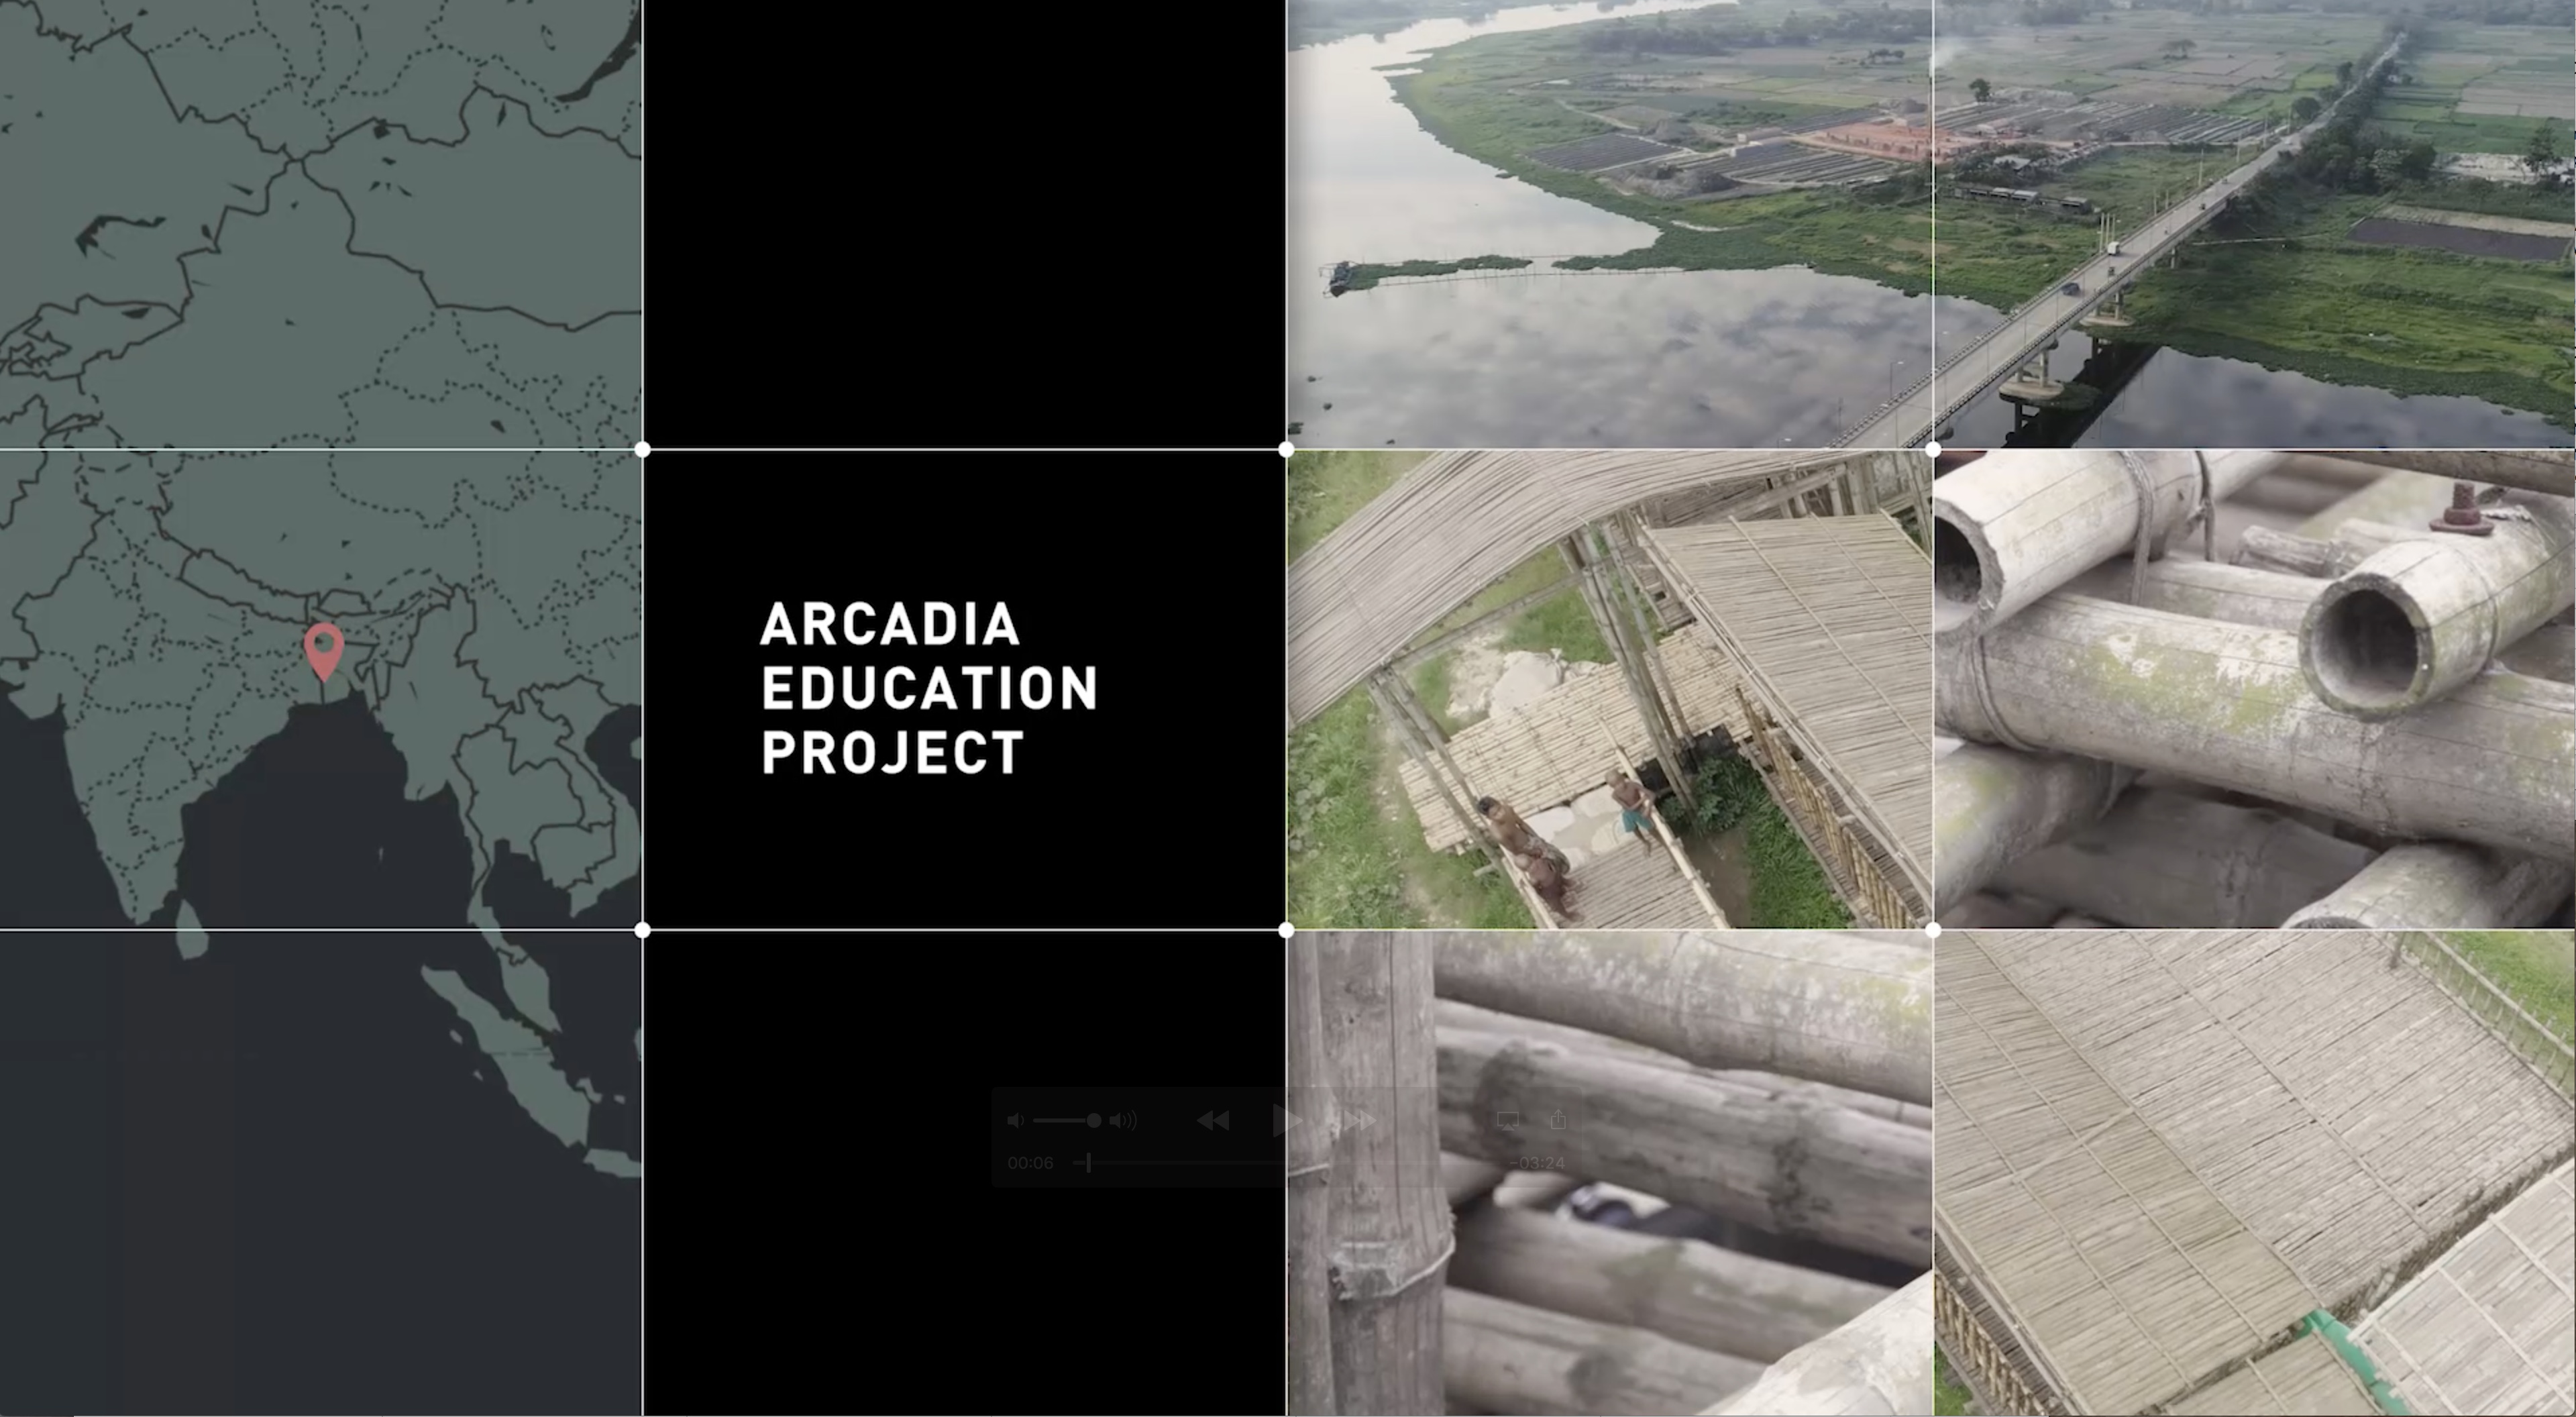 Video Introduction to the Arcadia Education Project